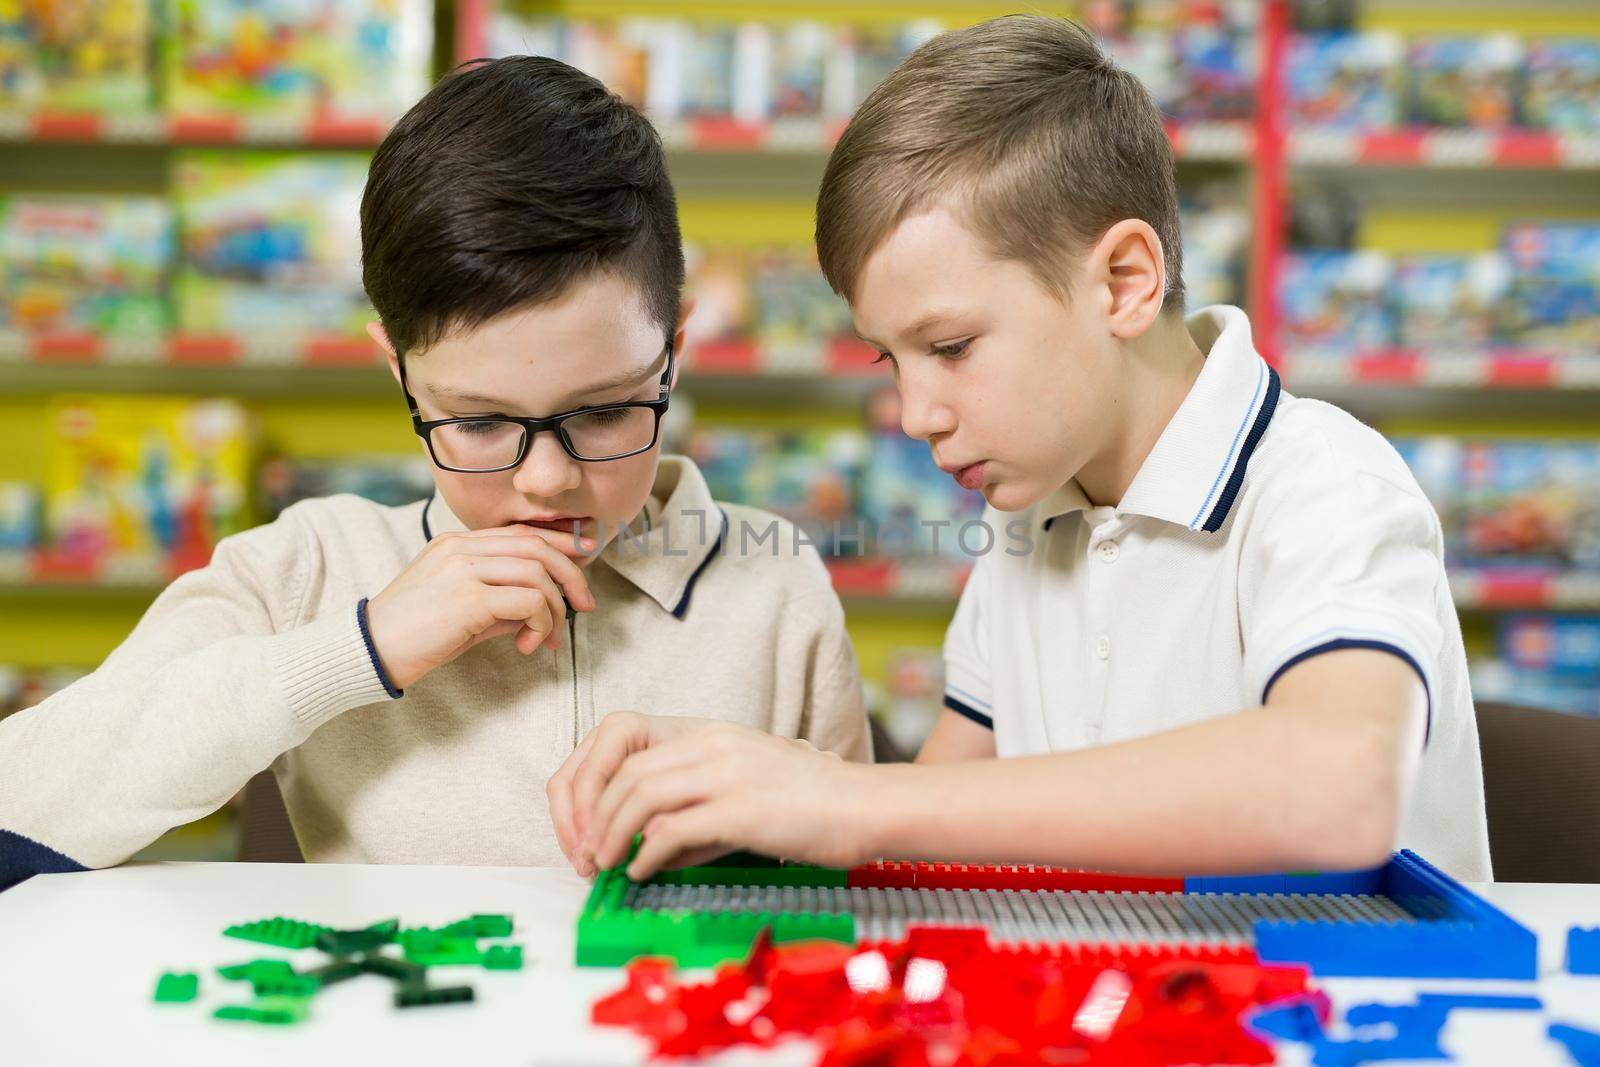 Children play in the designer at the table. Two boys play together with colored plastic blocks in the gaming center, school by StudioPeace